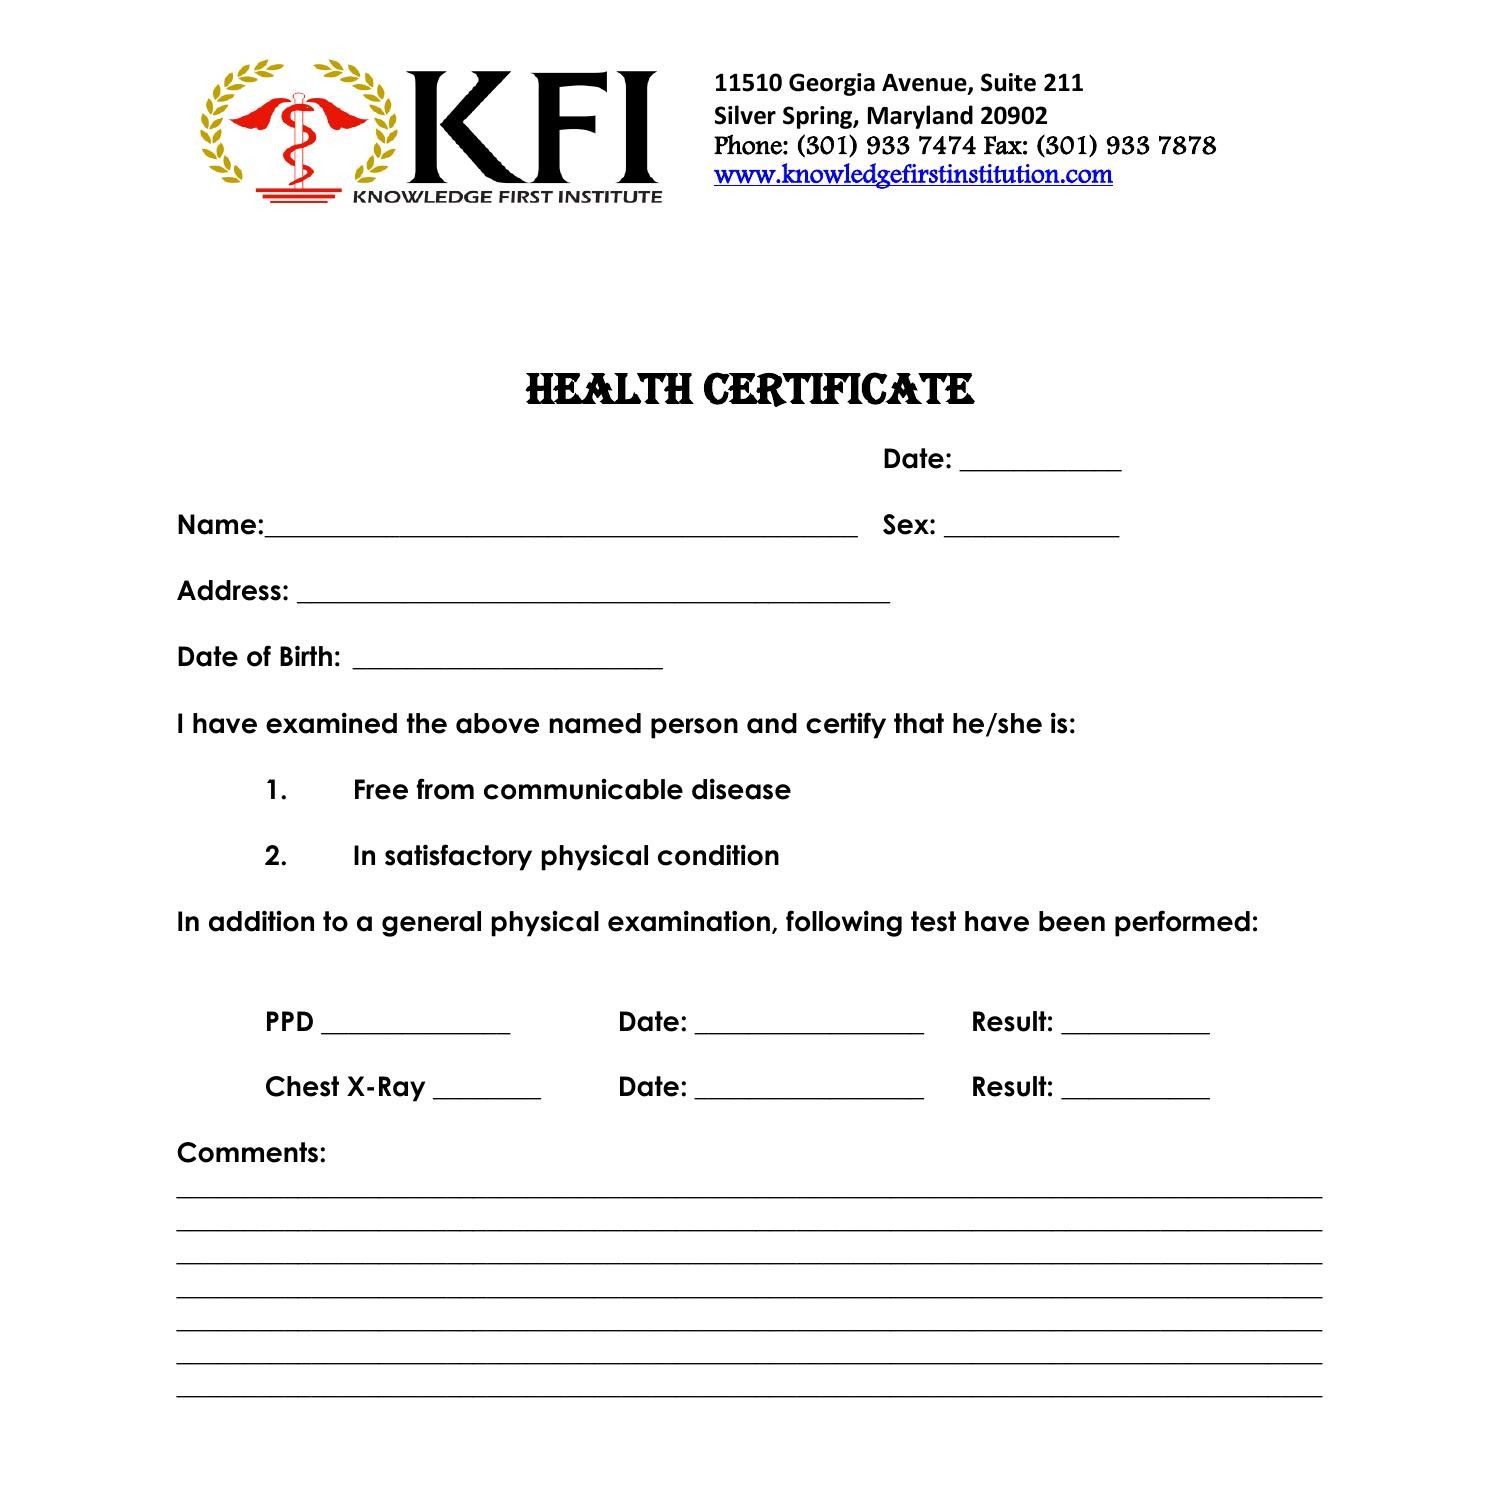 health certificate cbr Regarding Fit To Fly Certificate Template